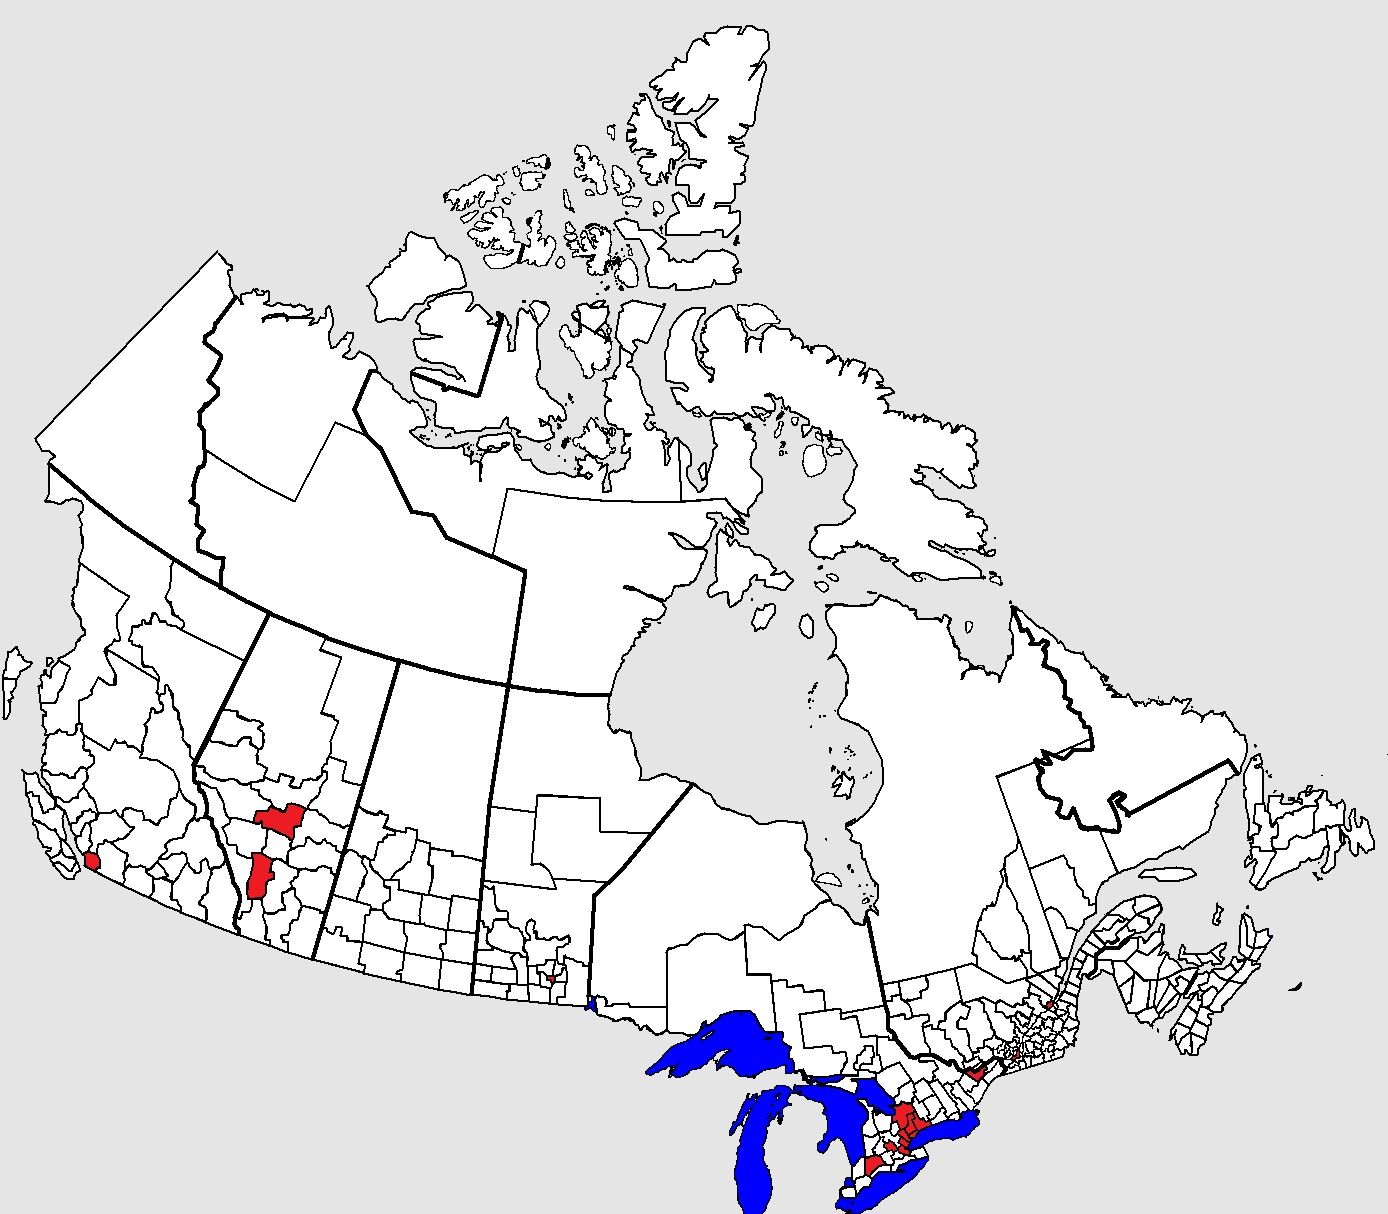 Where Does Everyone Live In Canada? Check Our Map To Find Out!